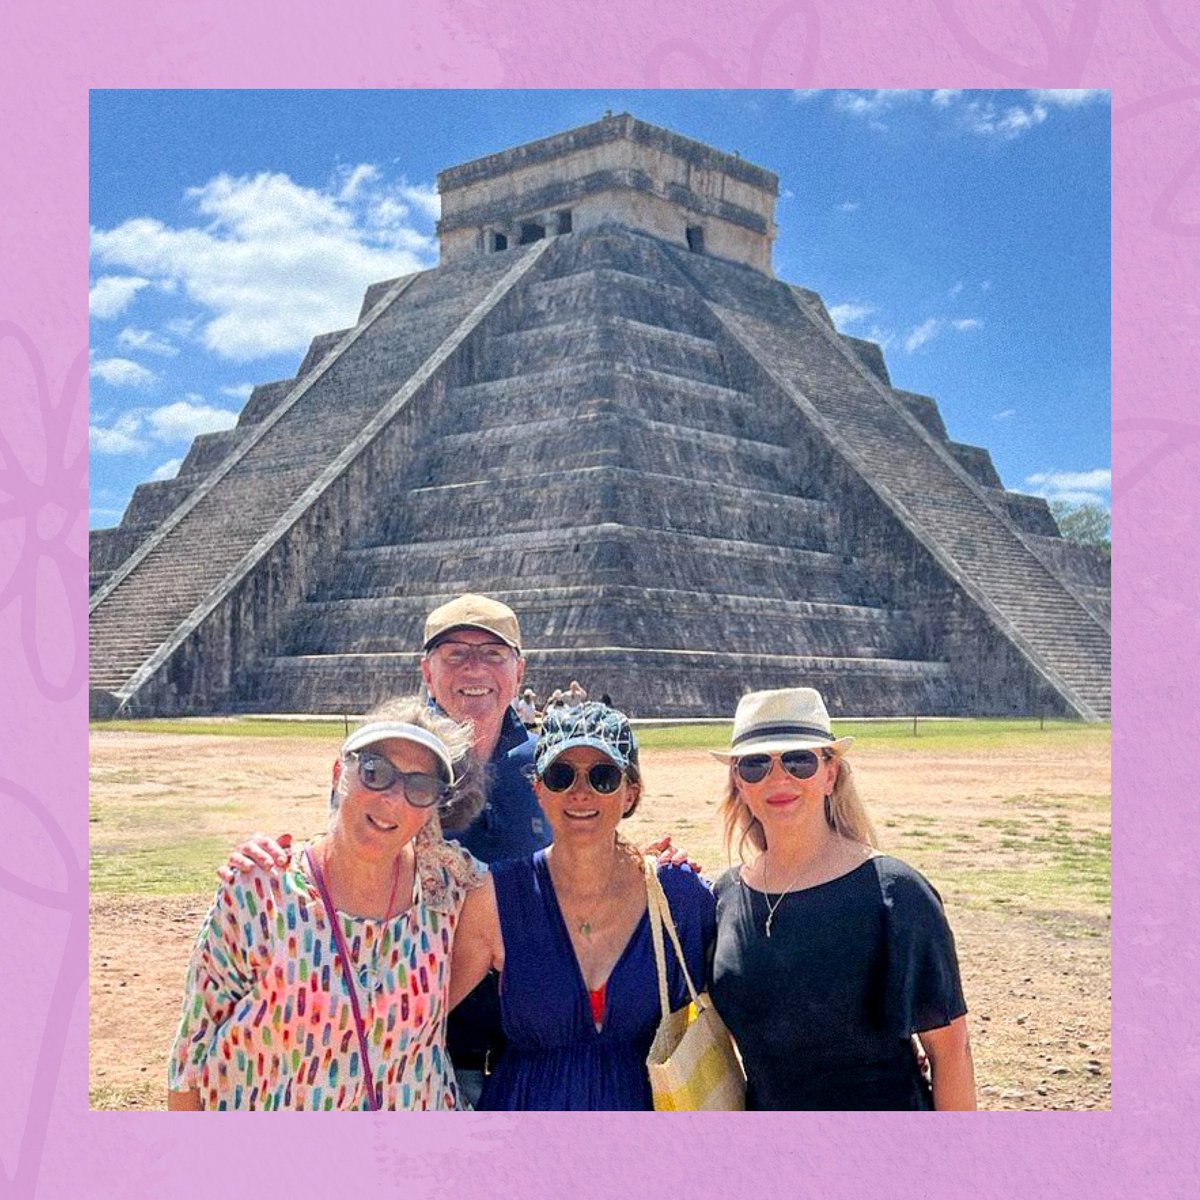 #throwback to the Mayan ruins in Mexico. It was amazing to be surrounded by the history of another culture and a testament to building something so long ago which can still stand strong now! #mielmusic #mayanadventure #historyisallaround #friends #travelling #mexico